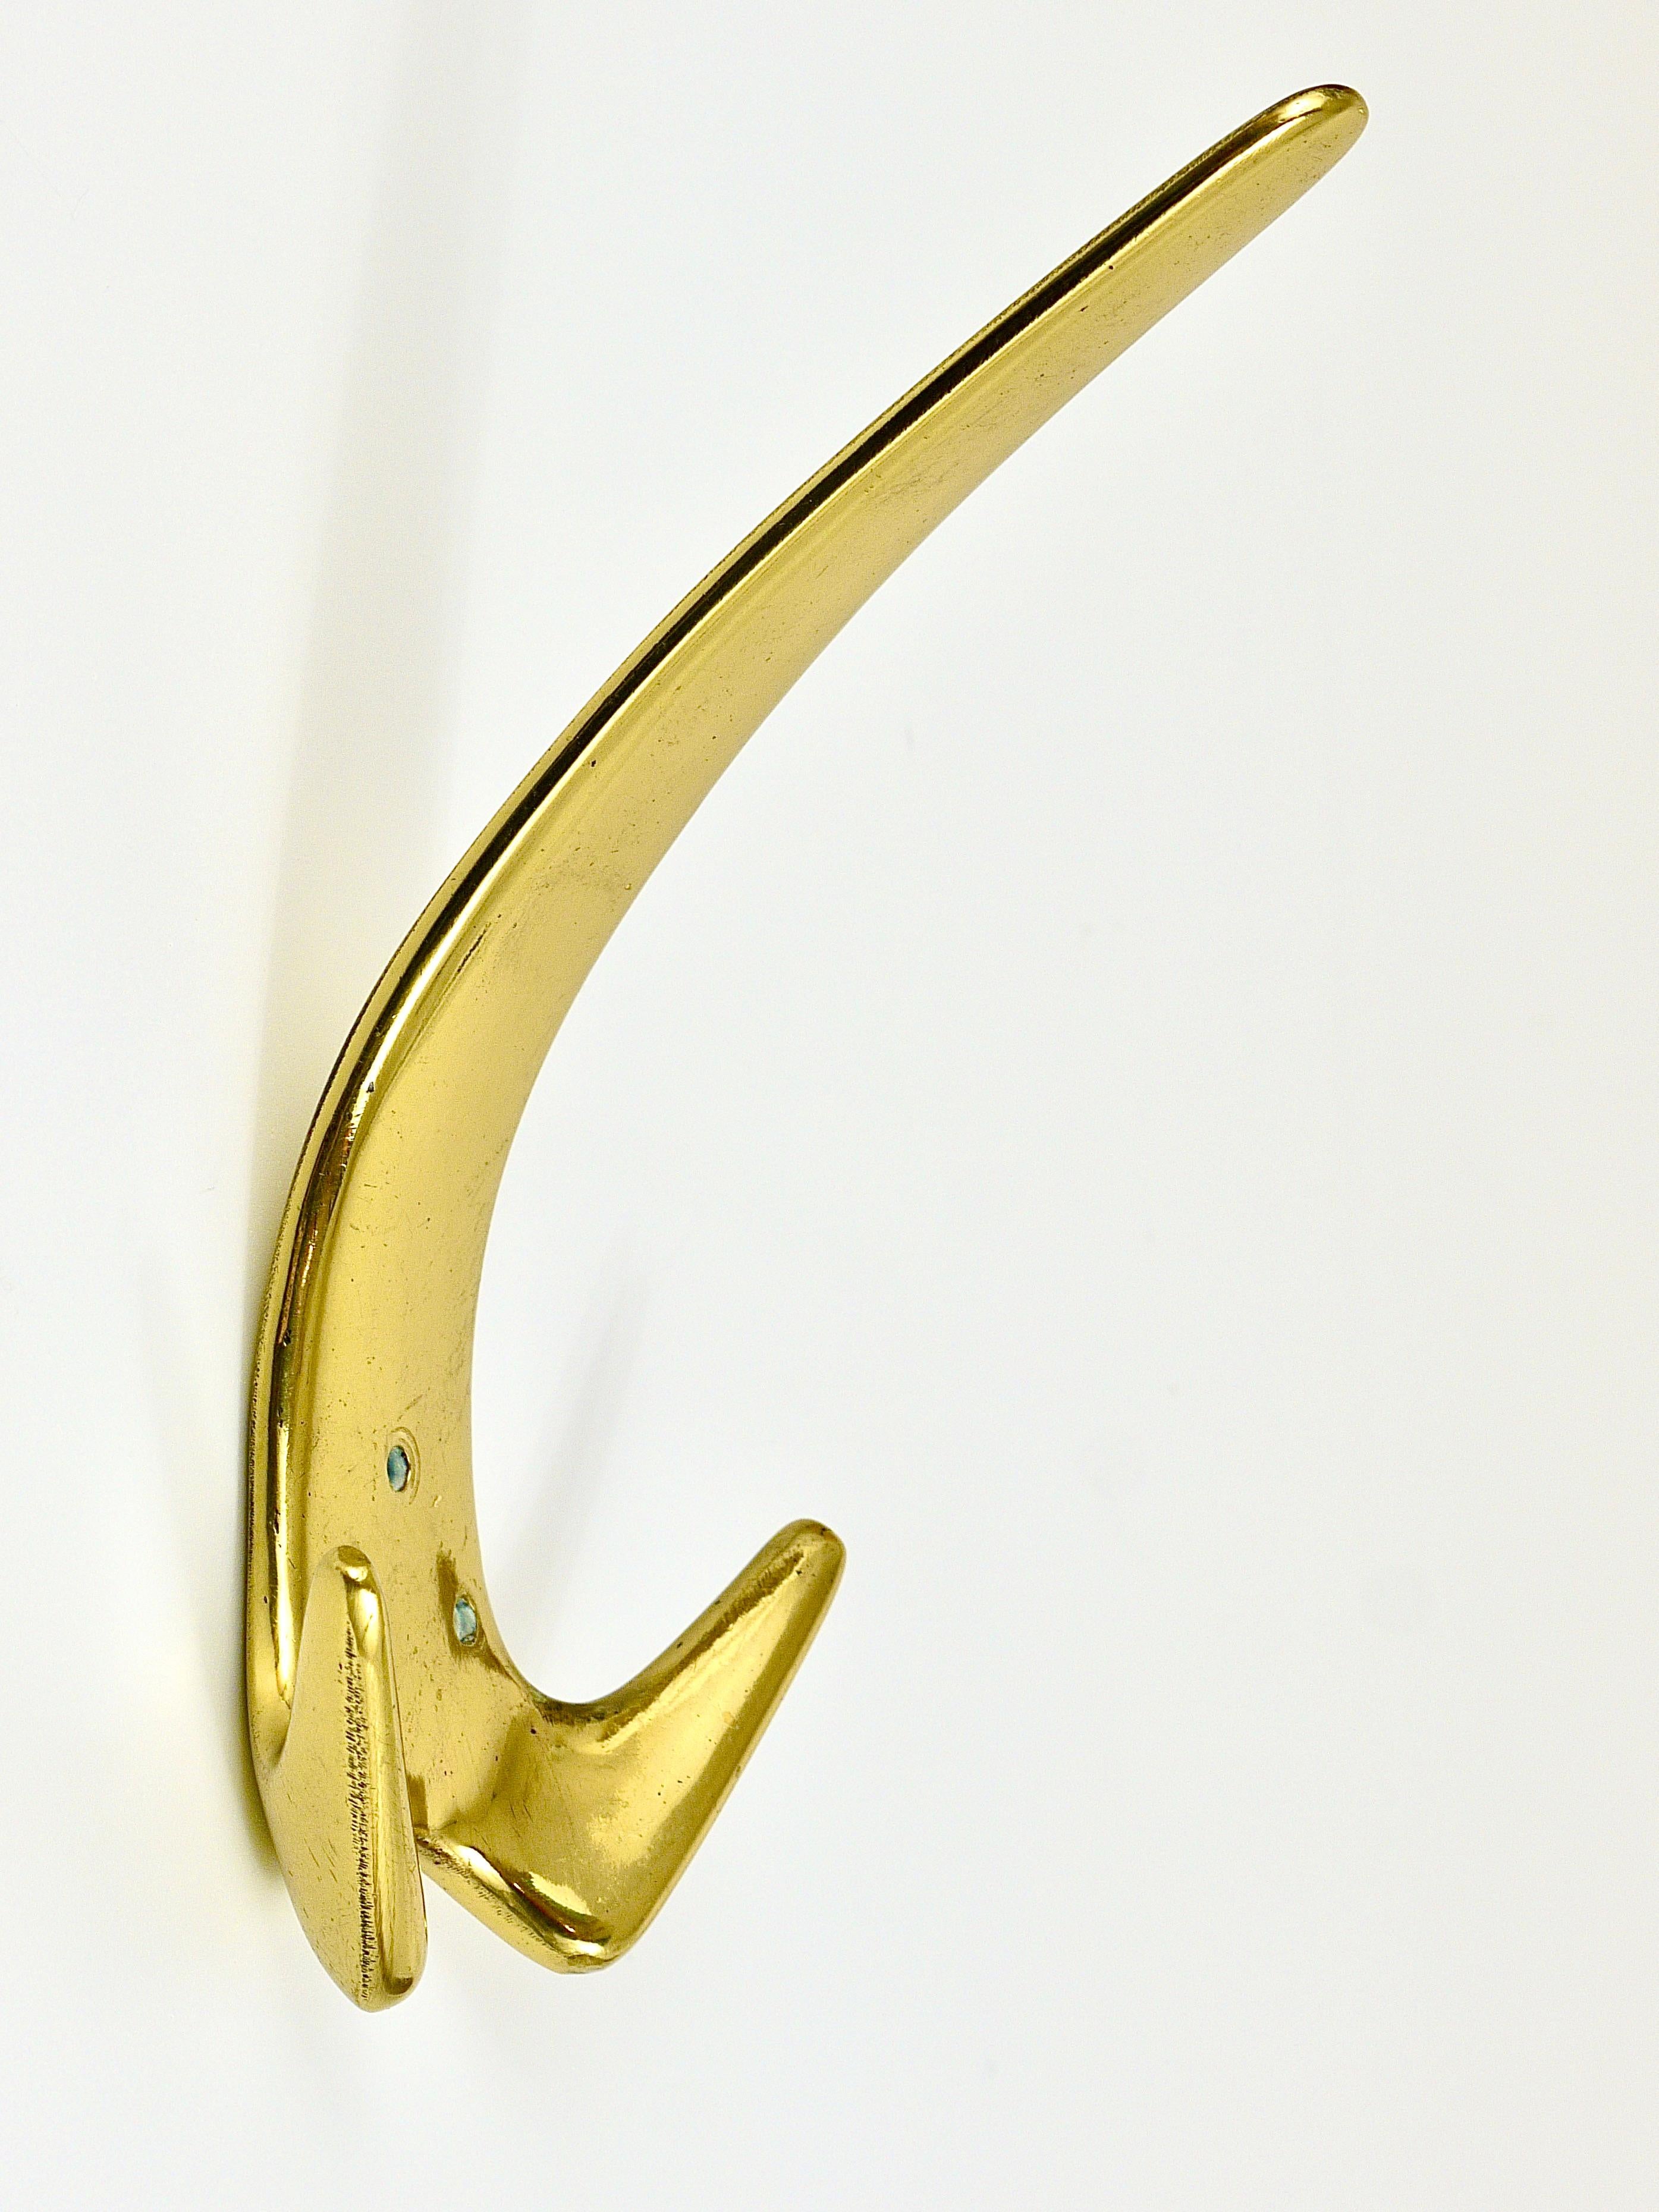 Polished Up to Five Carl Aubock Large Brass Double Wall Coat Hooks #4056, Austria, 1950s For Sale